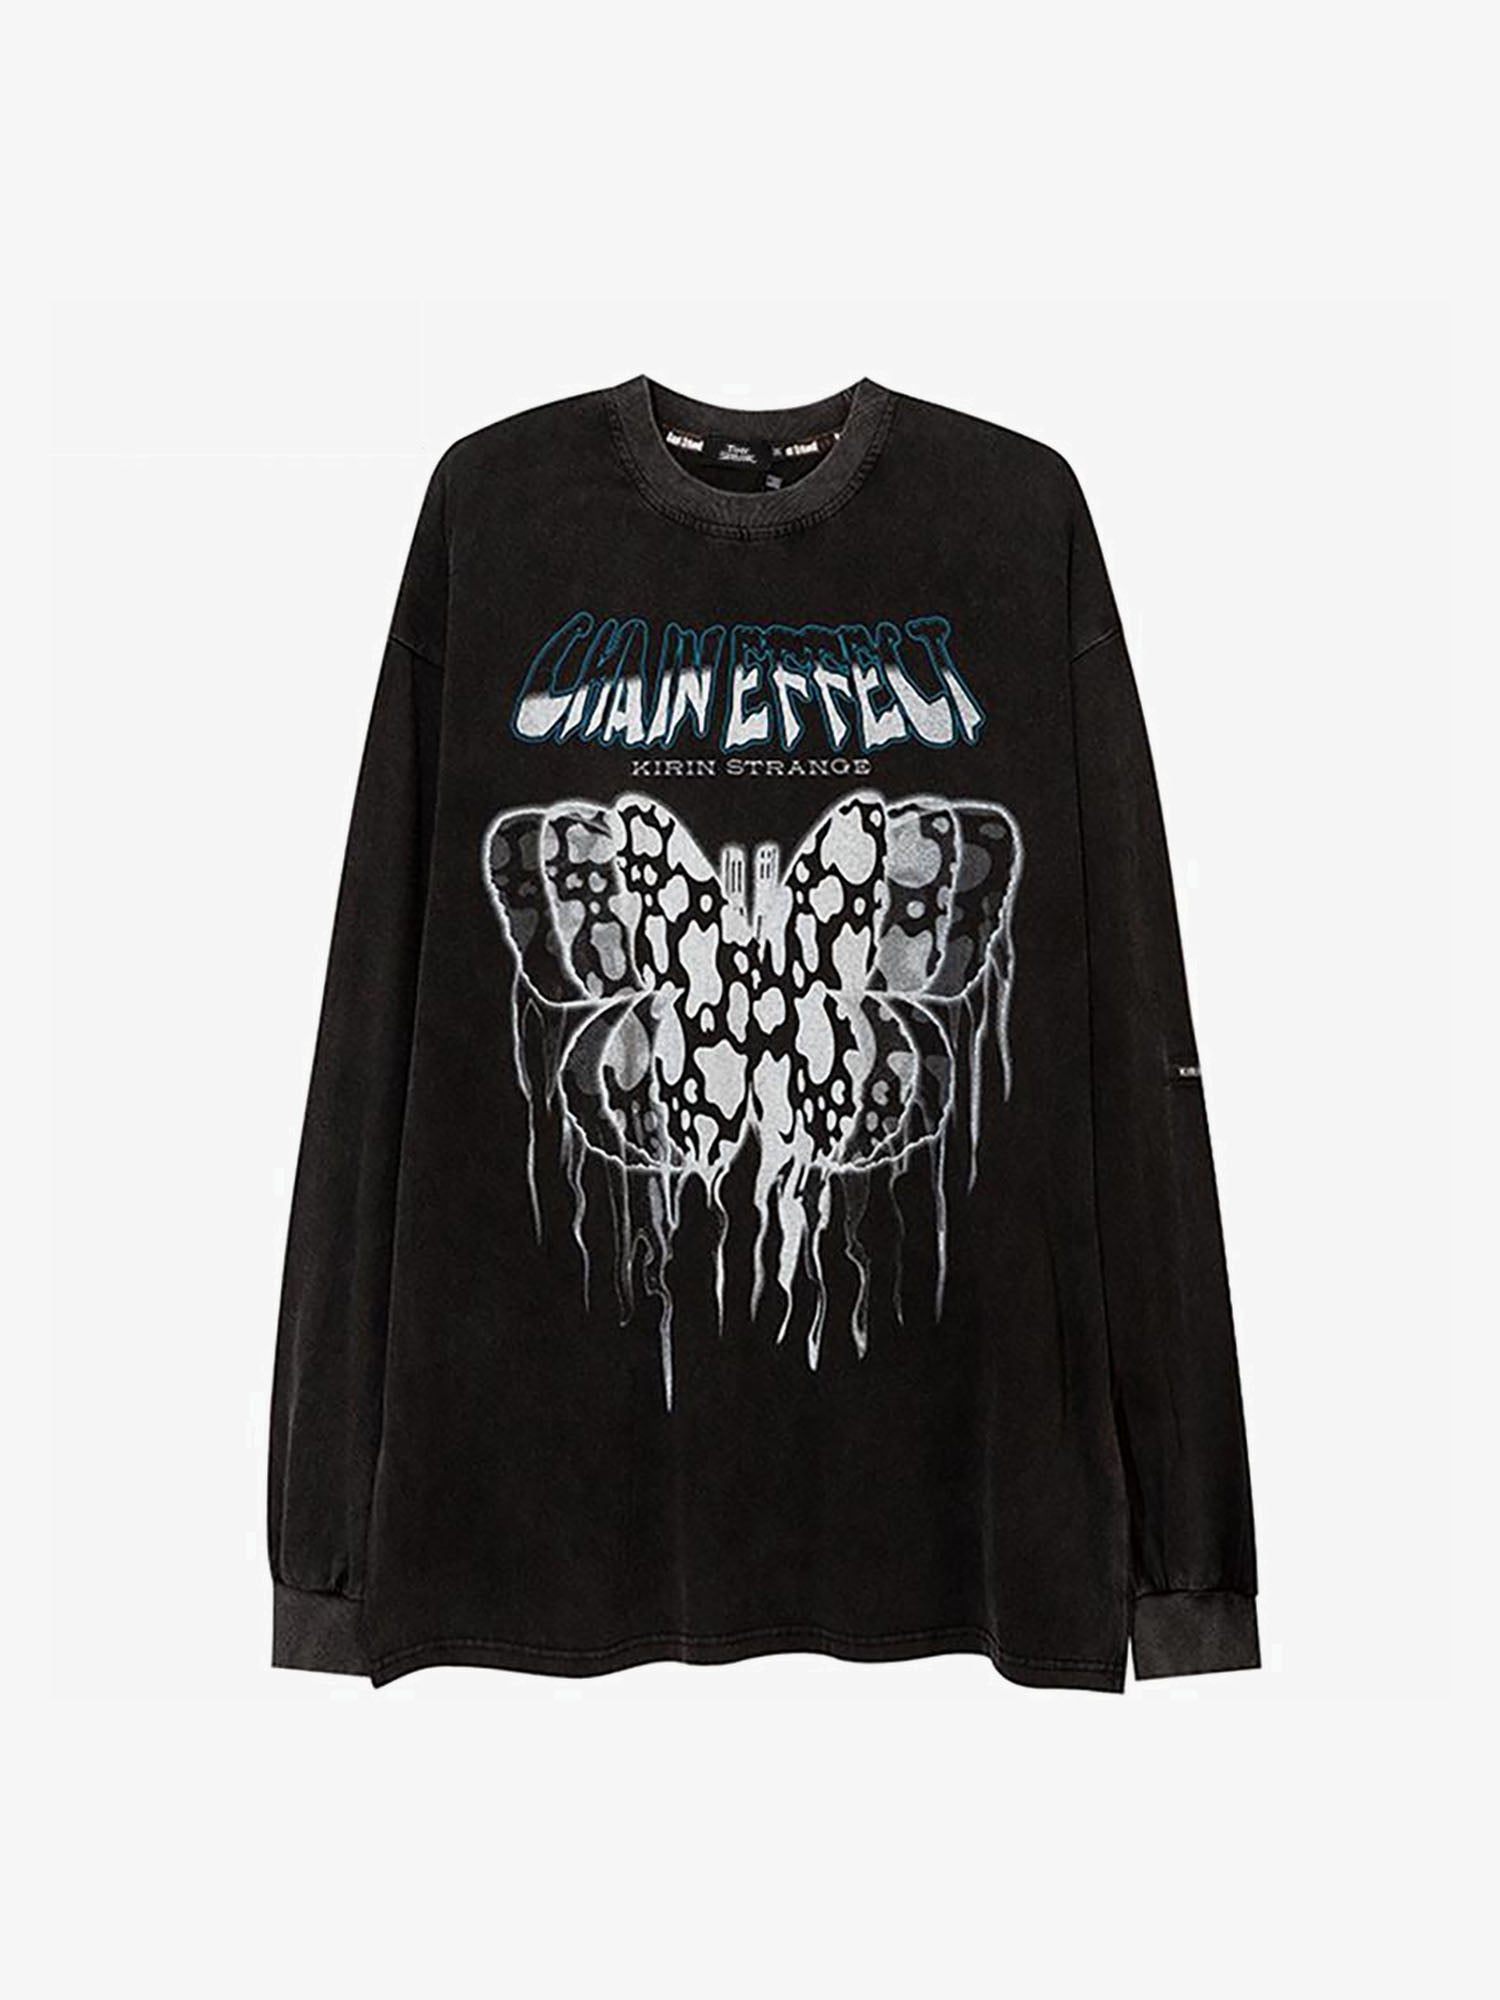 JUSTNOTAG Spotted butterfly phantom Long Sleeve Sweatshirts